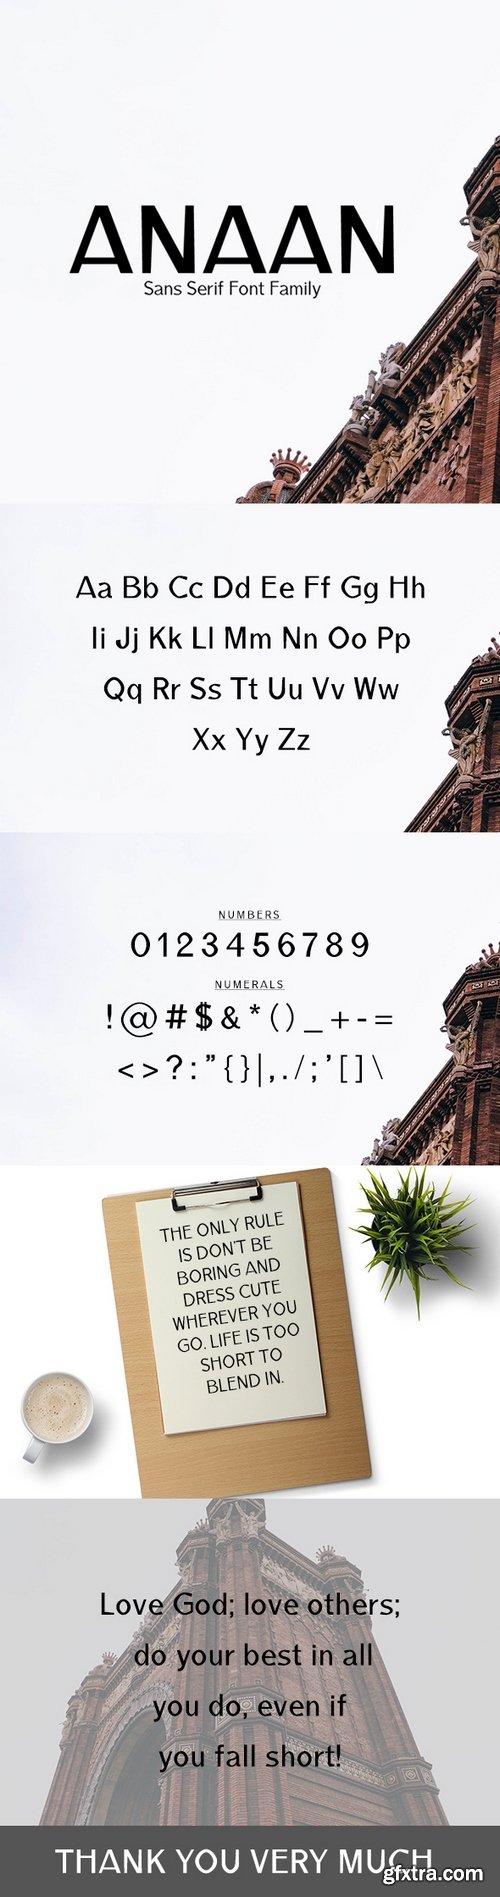 Graphicriver - Anaan Sans Serif Font Family 19705616